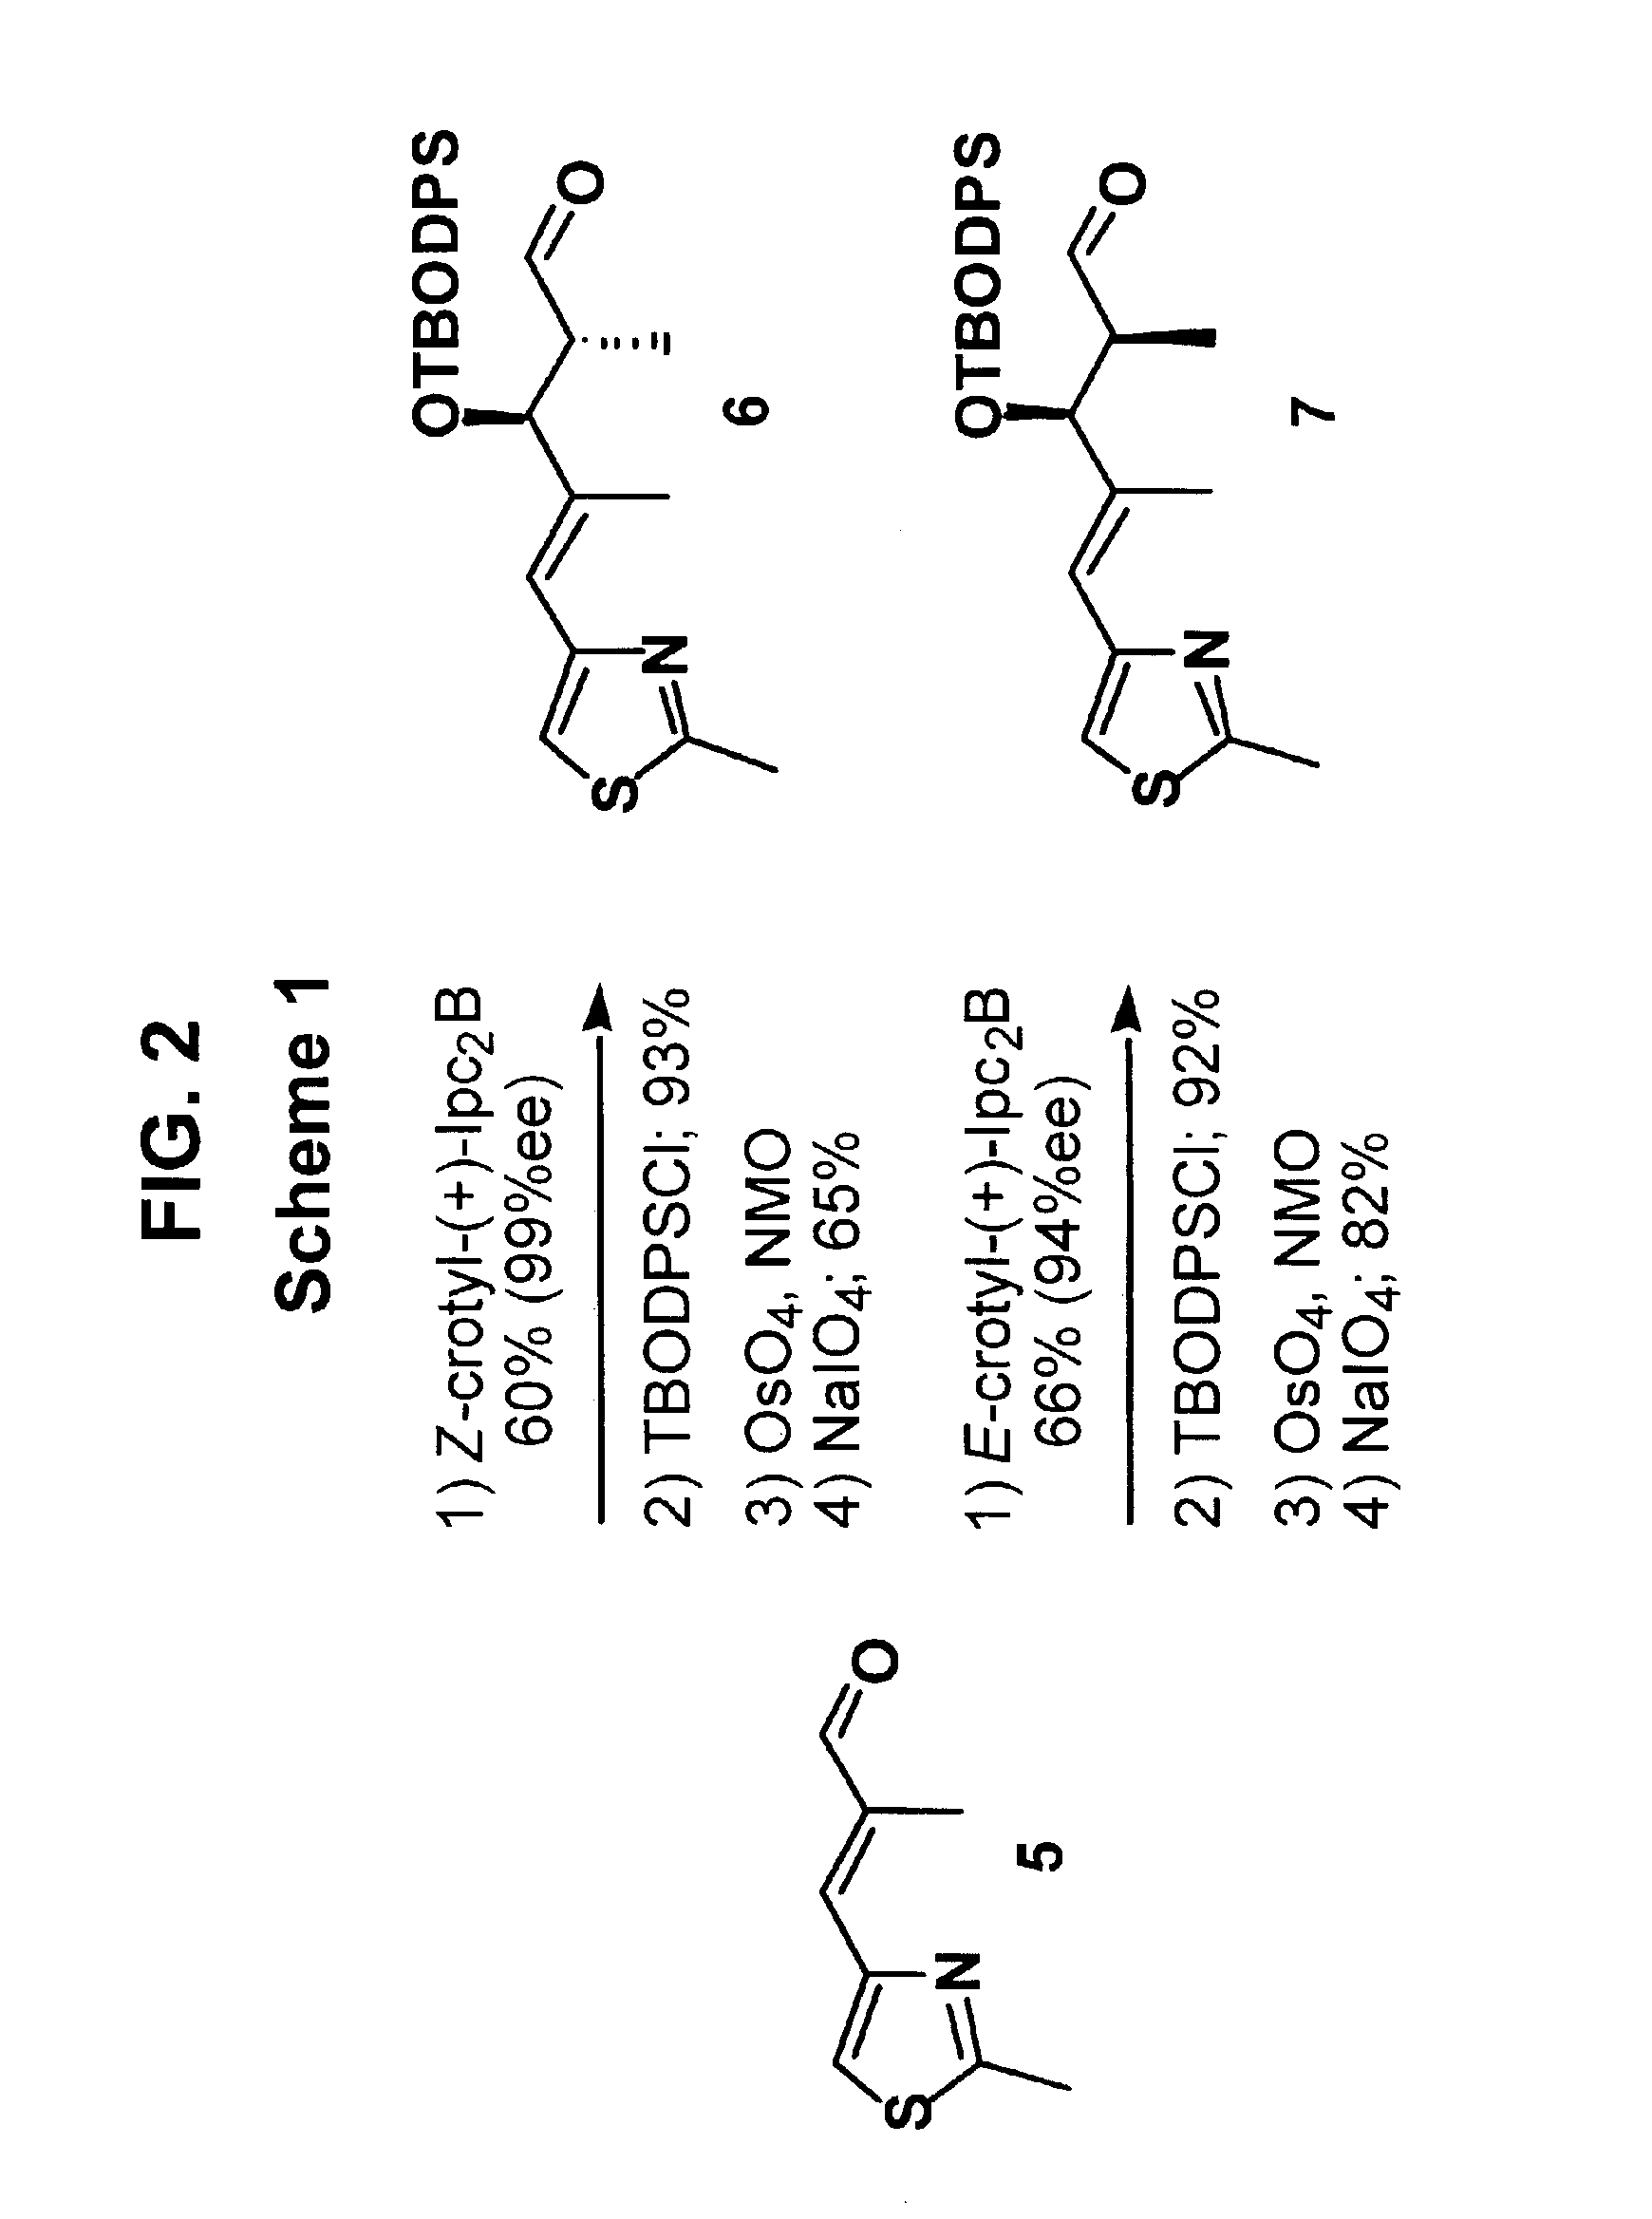 Derivatives of epothilone B and D and synthesis thereof